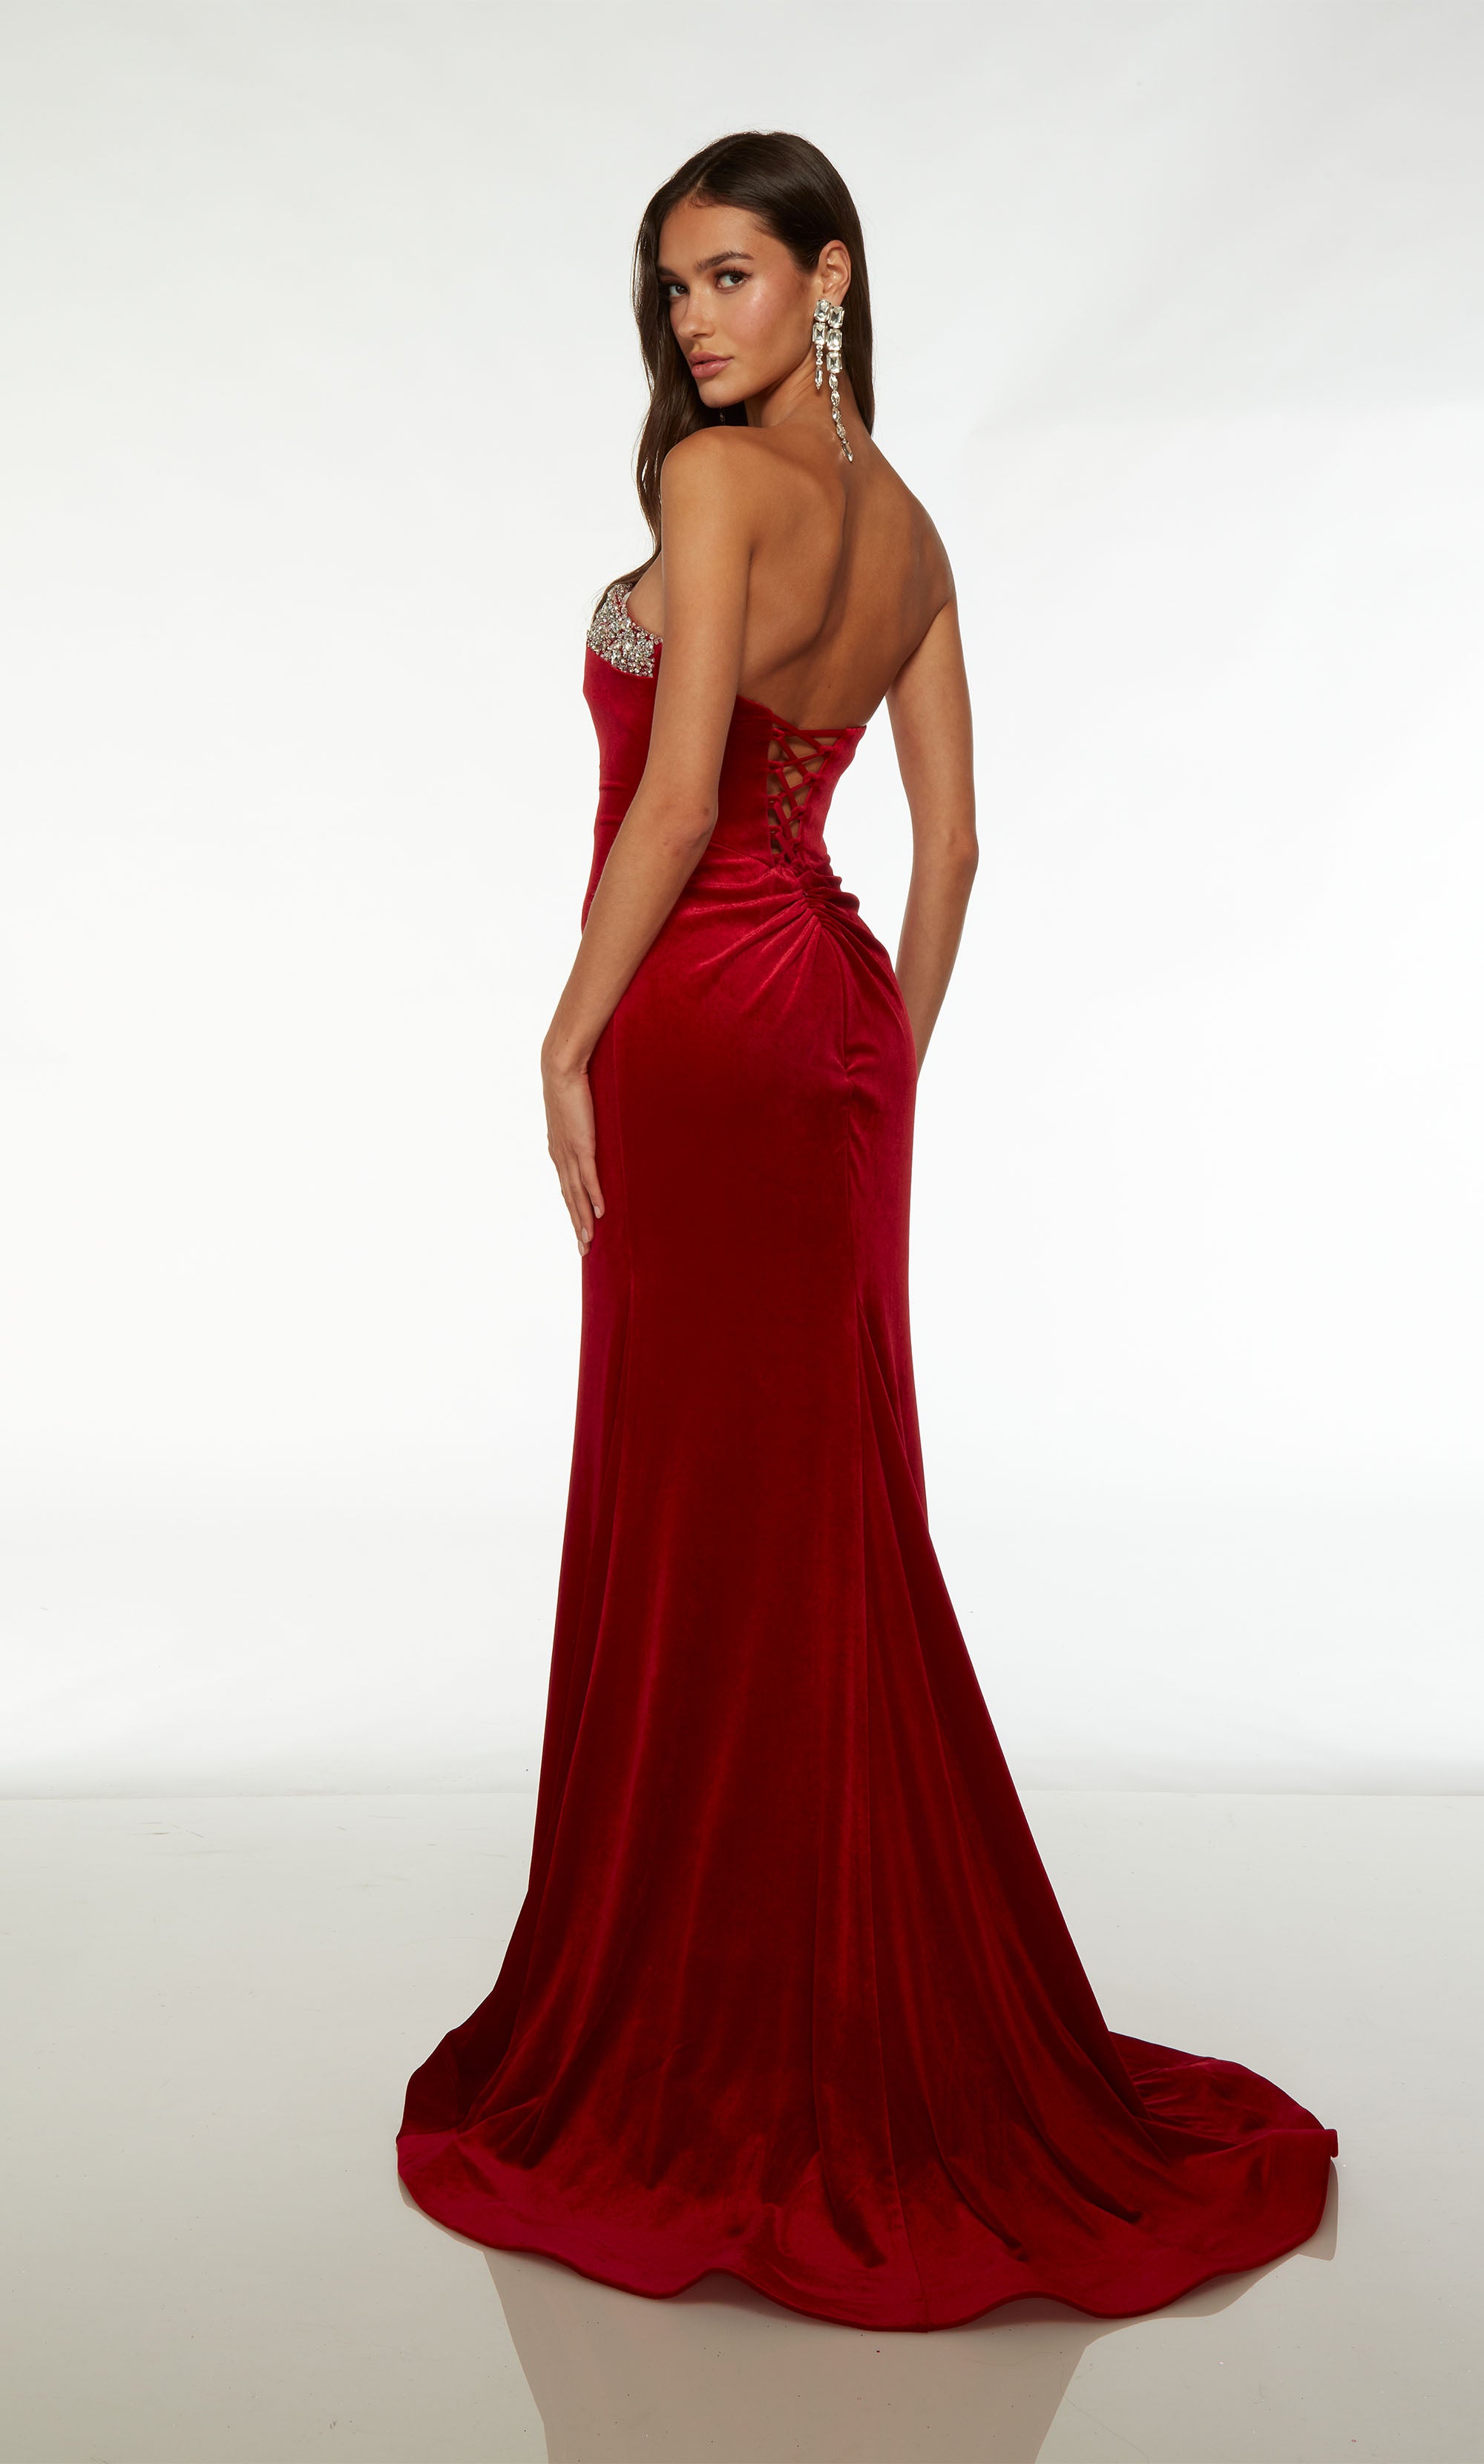 Red velvet fit-and-flare formal gown: Silver rhinestone-trimmed strapless neckline, lace-up back, and an beautiful train for an stunning and elegant look.